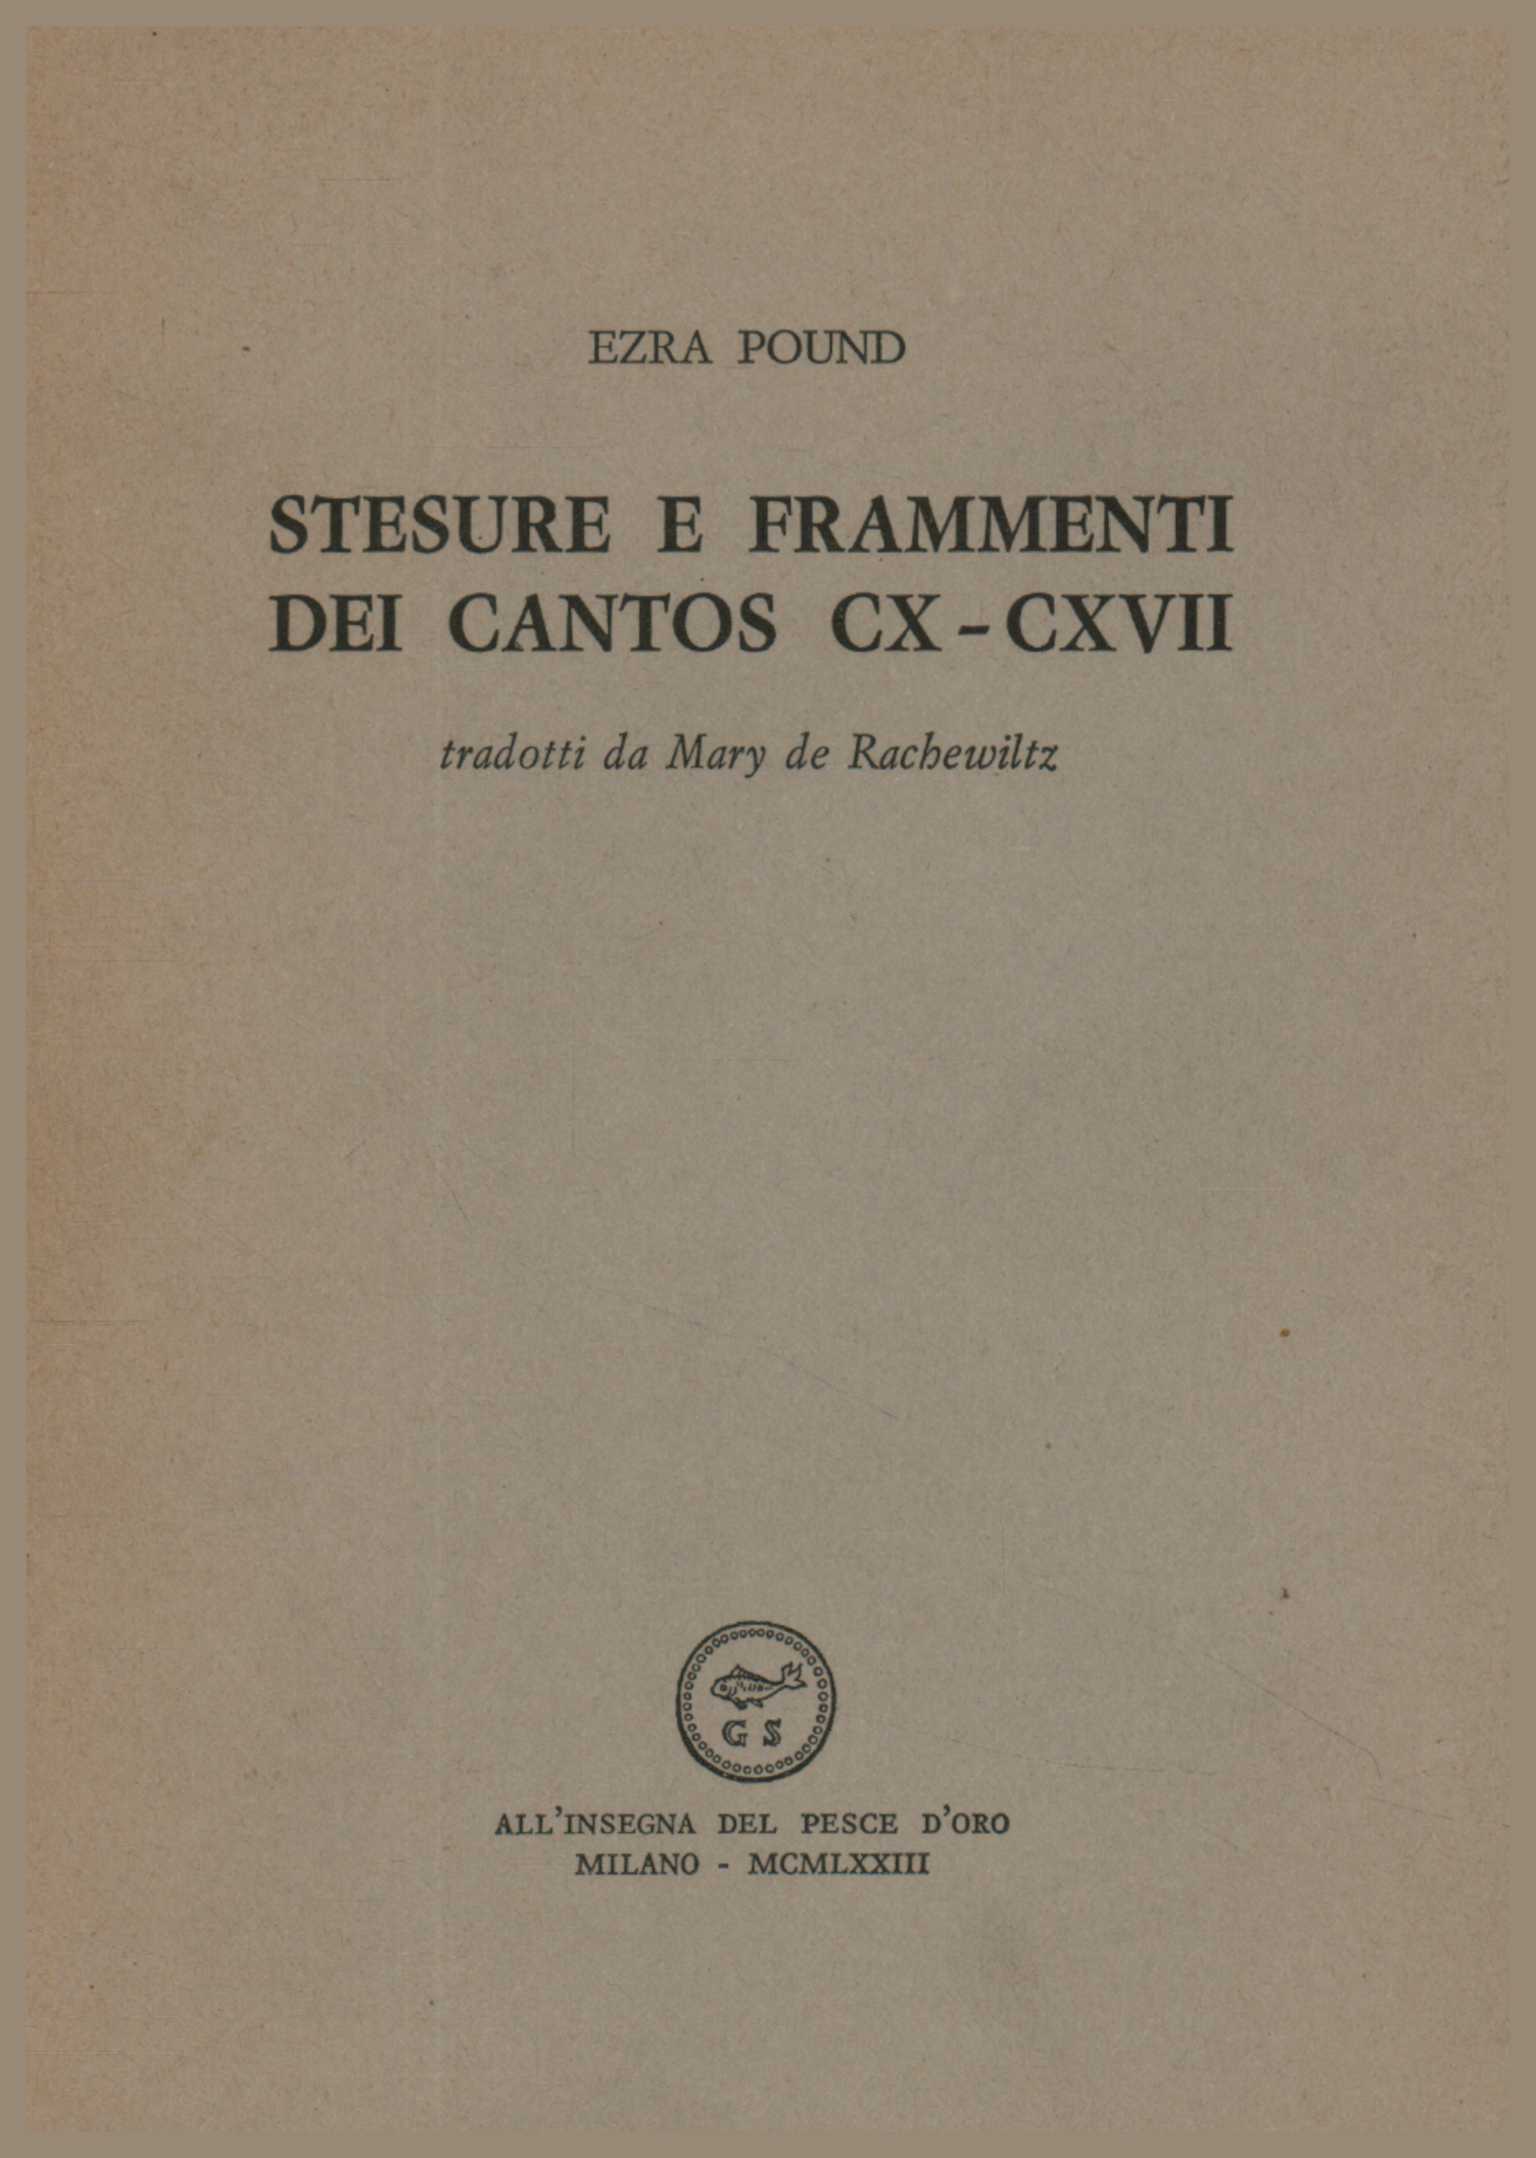 Drafts and fragments of Cantos CX -